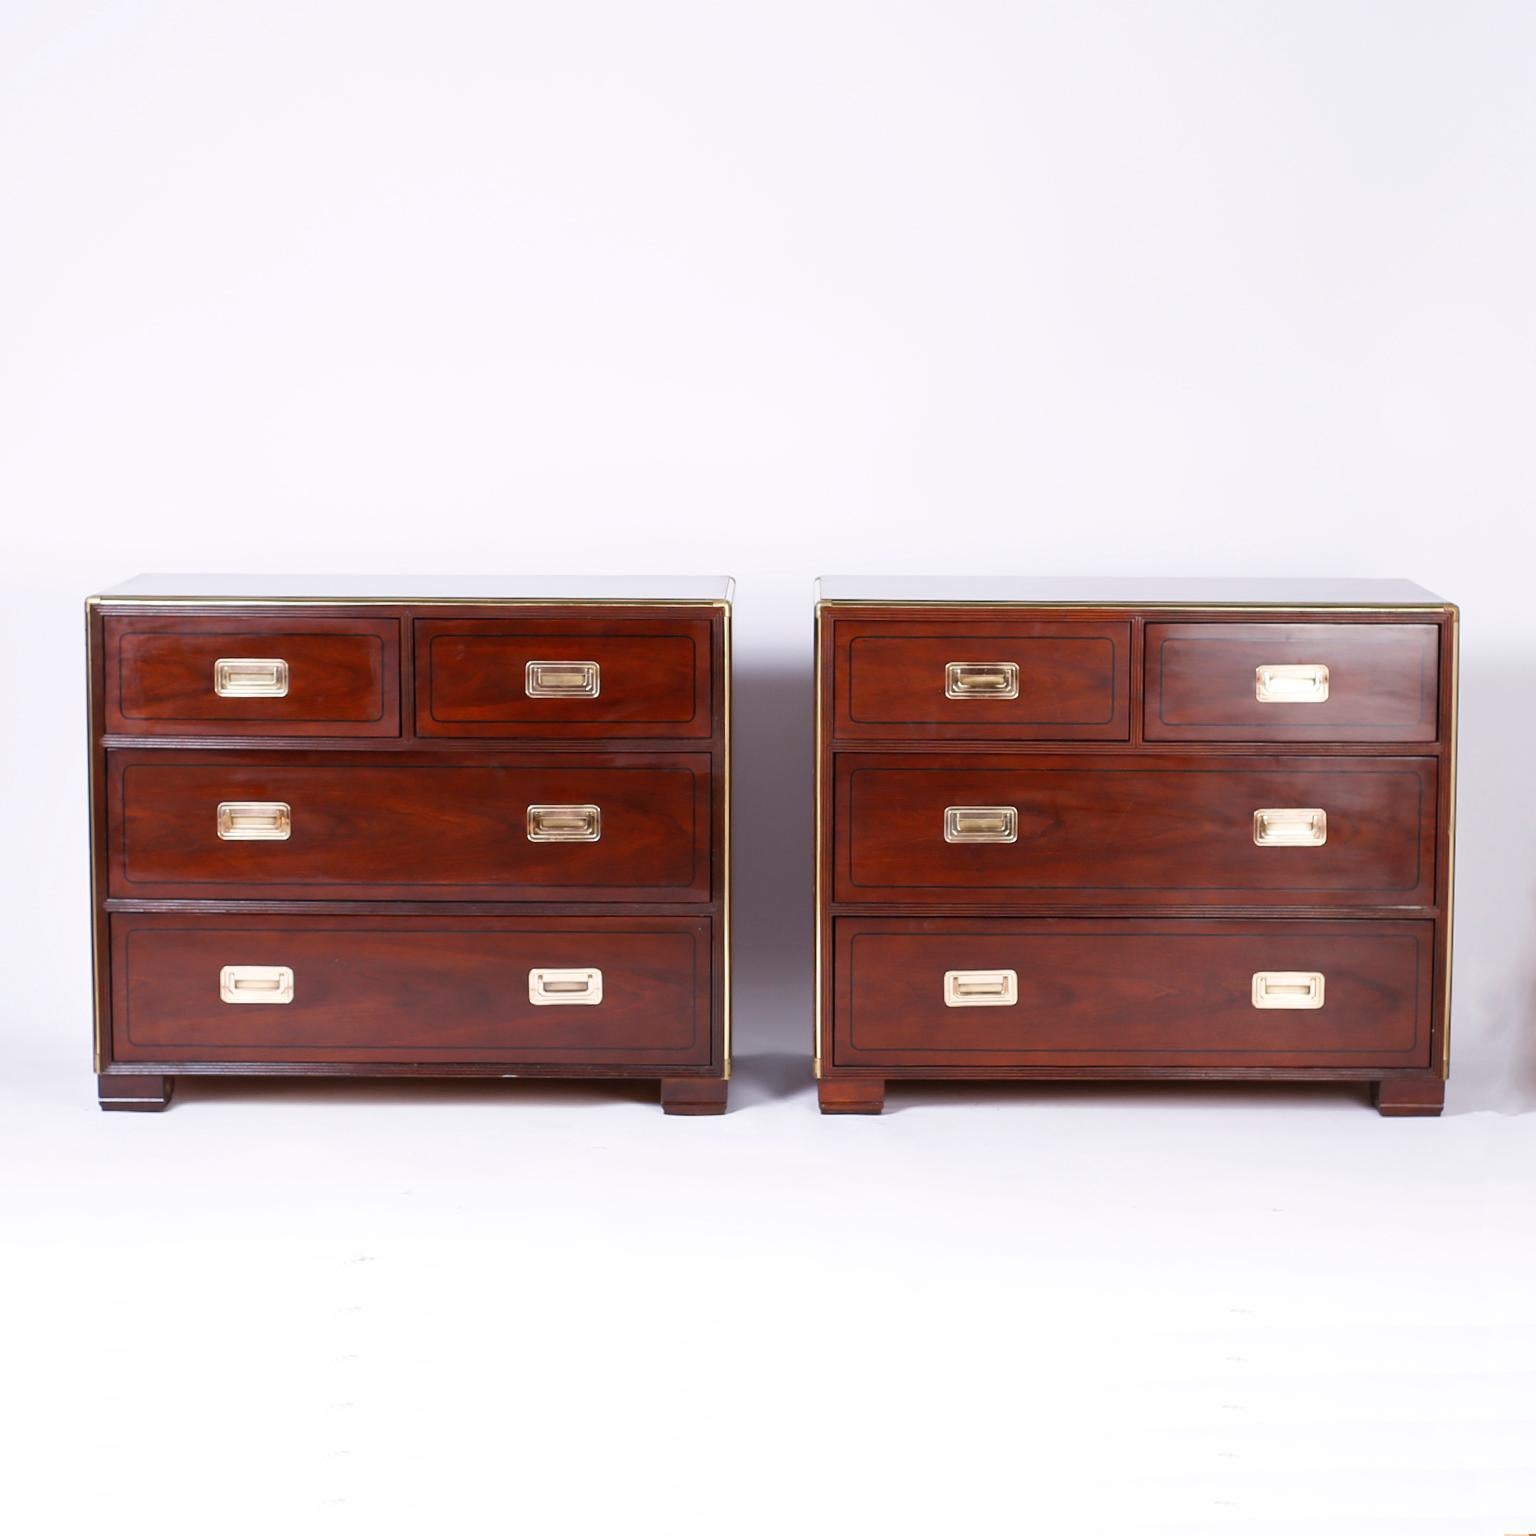 Pair of British Colonial mahogany chests of drawers with brass Campaign hardware, string inlaid borders around the drawer fronts and stylized block feet. Signed Baker in a drawer.